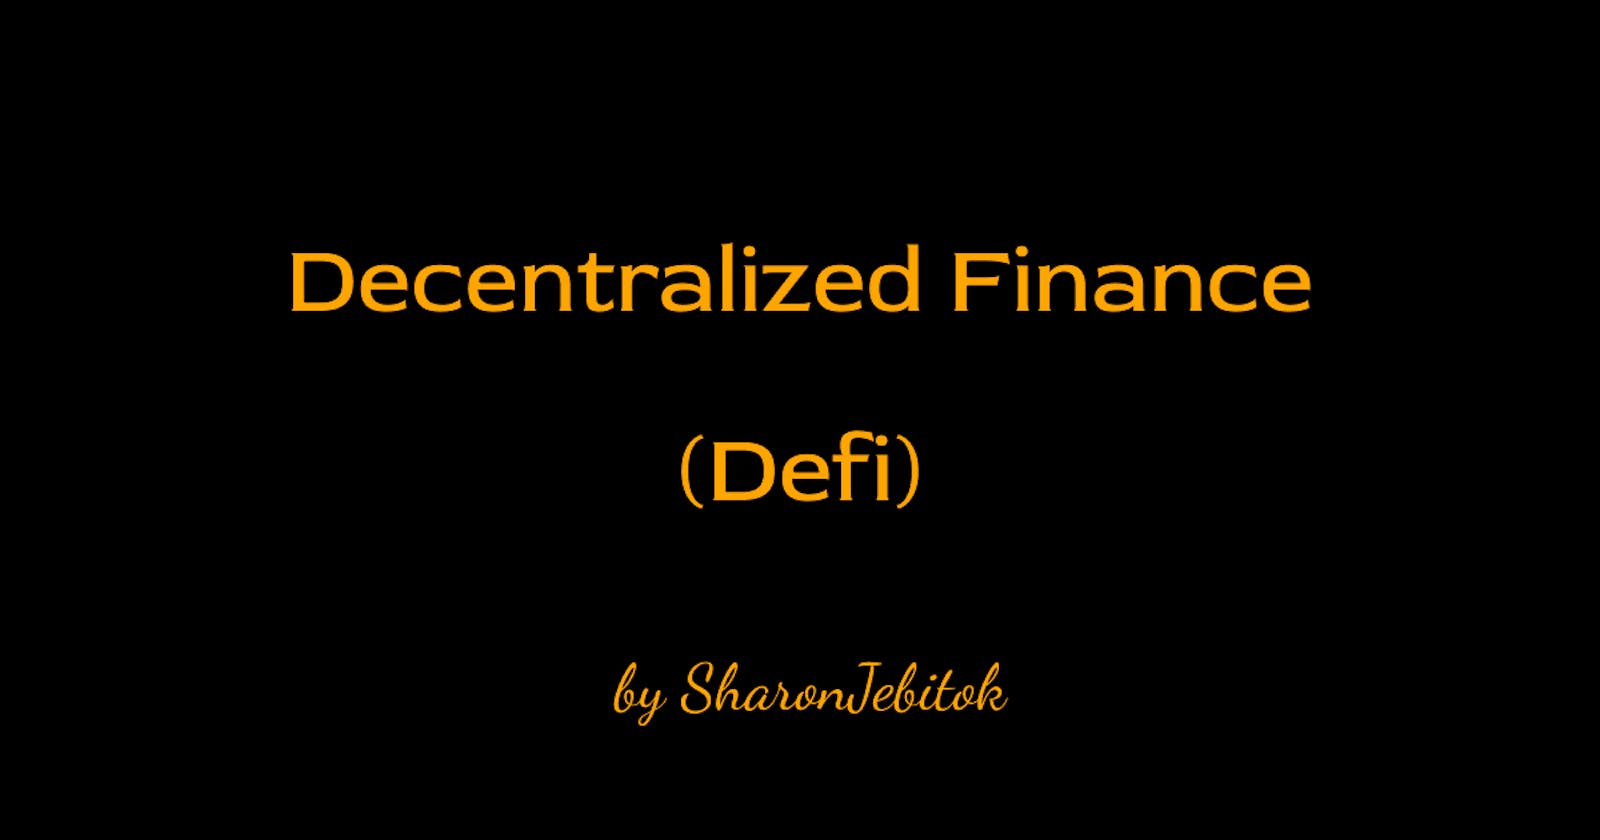 What's Decentralized Finance and How to build a DeFi App